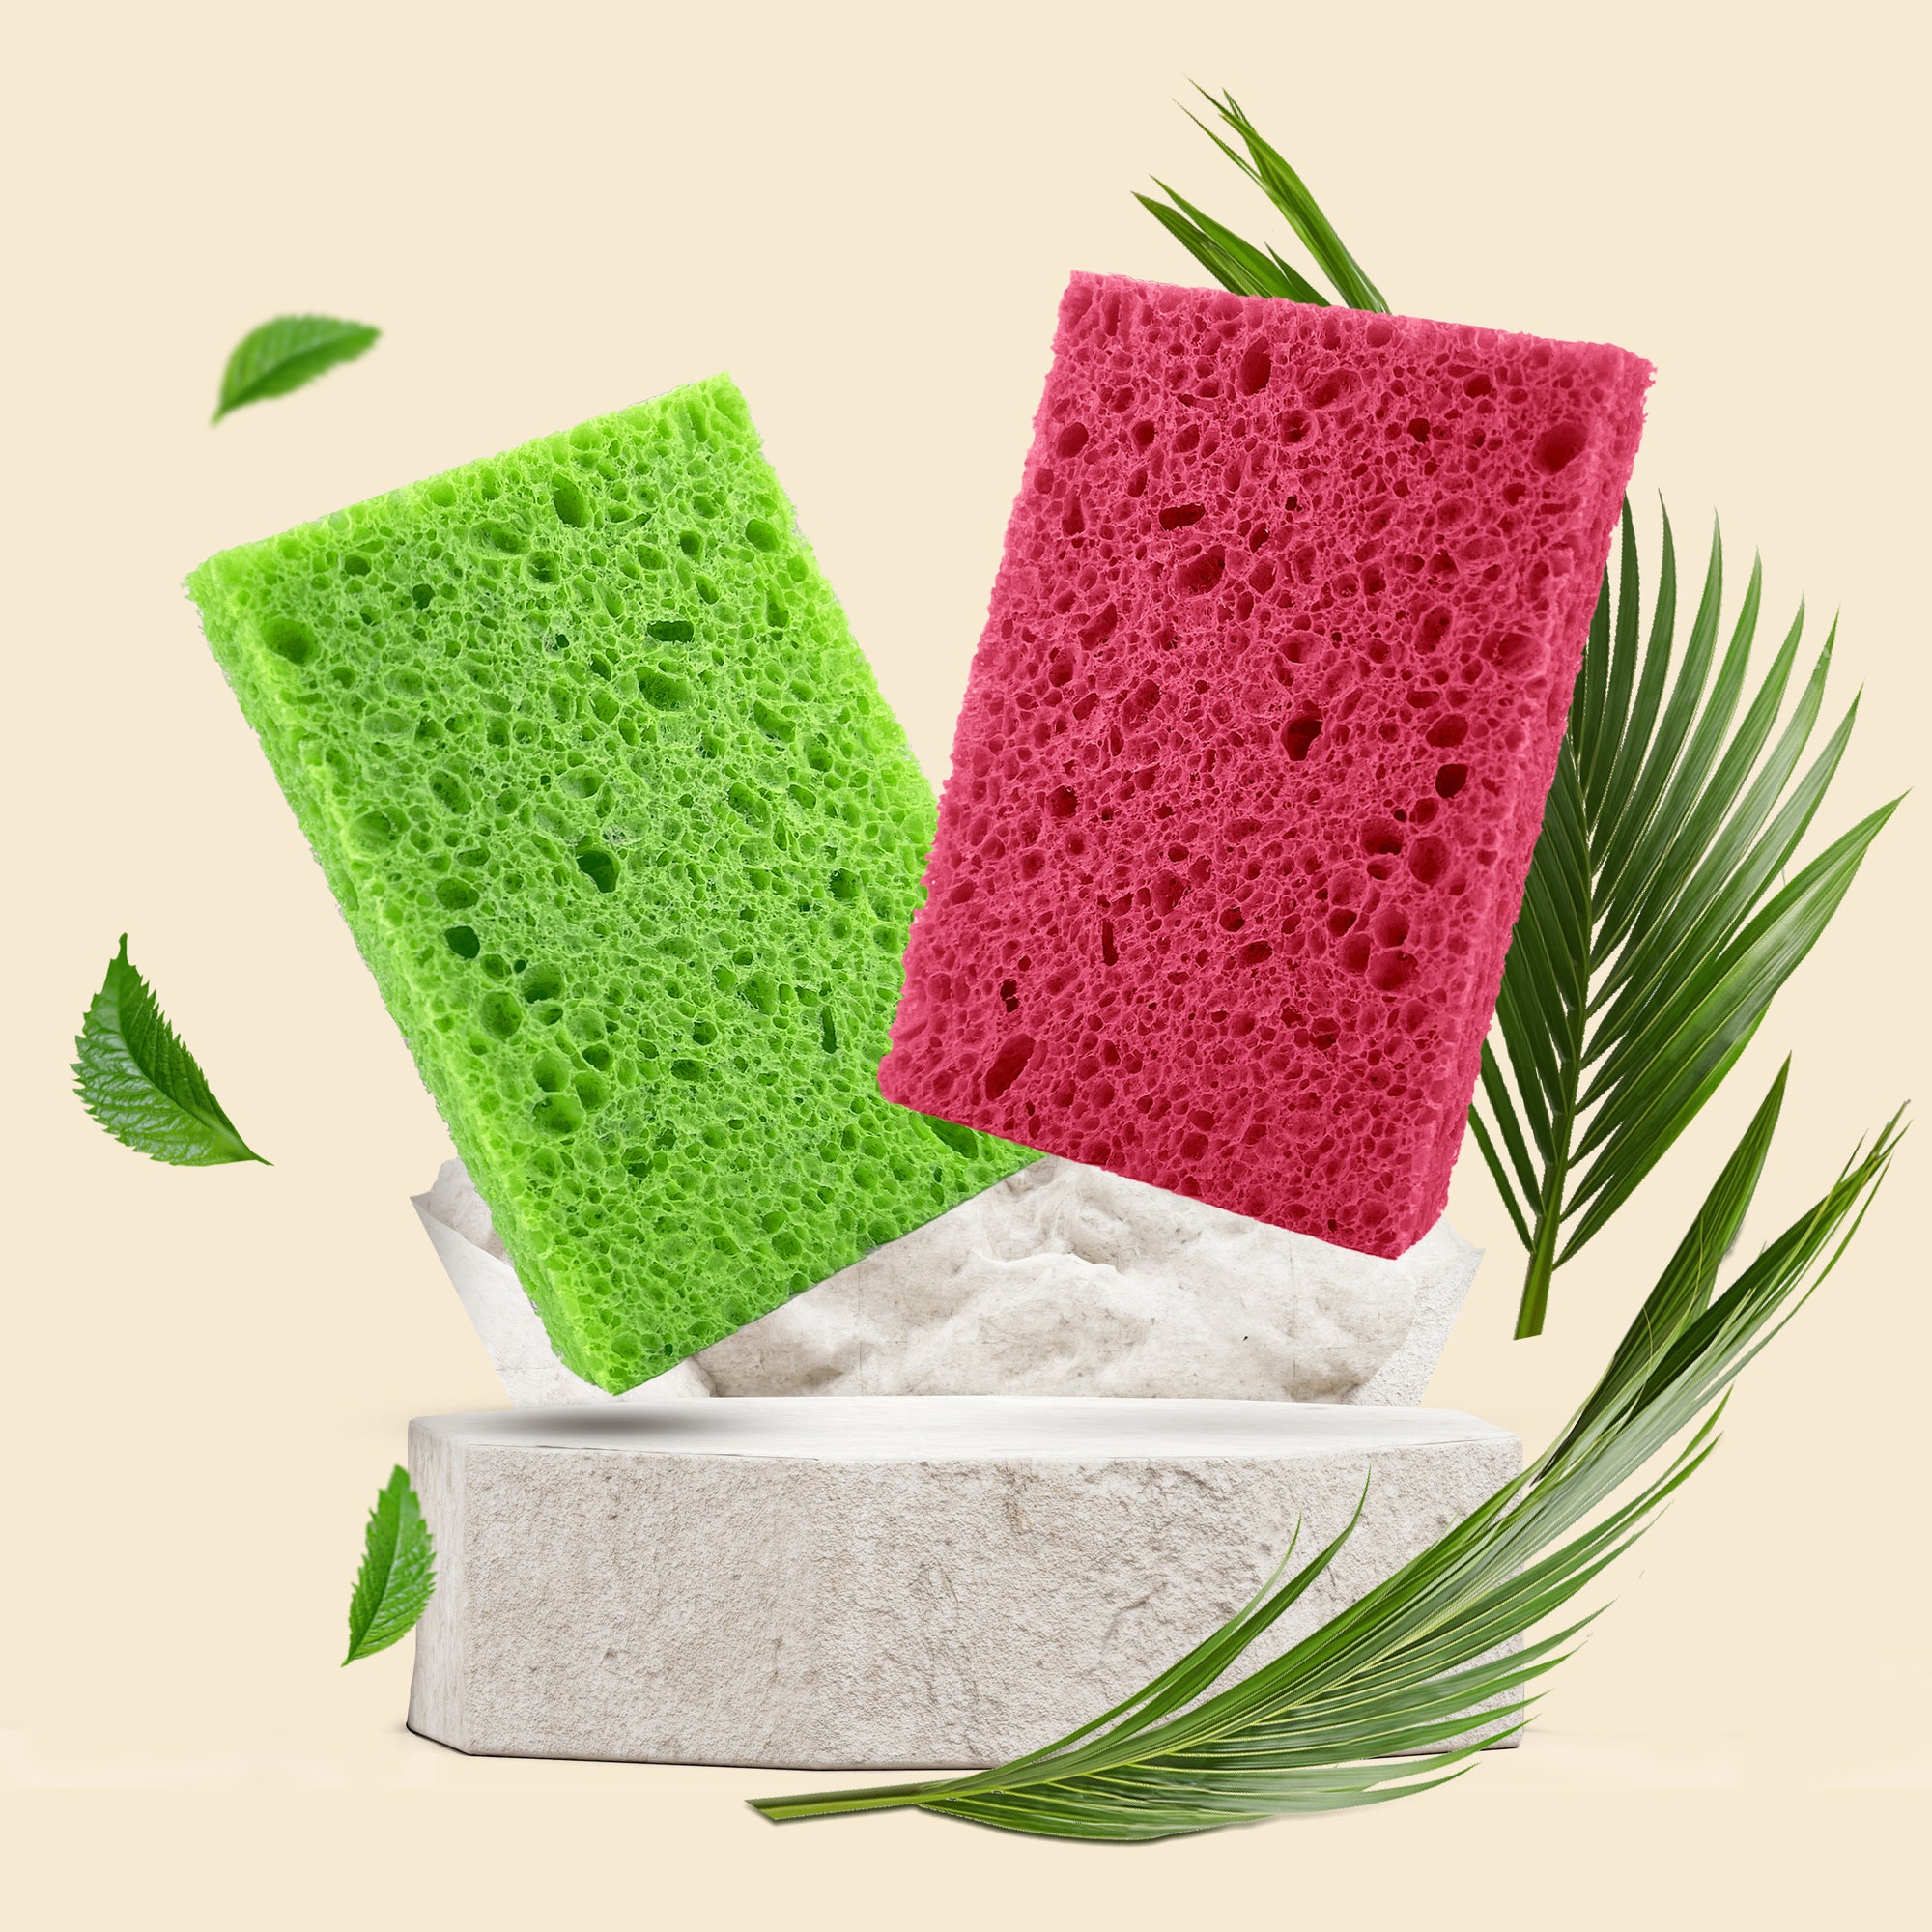 Biodegradable & Compostable Cellulose Compressed Sponges - Pack of 12 (Rectangular)